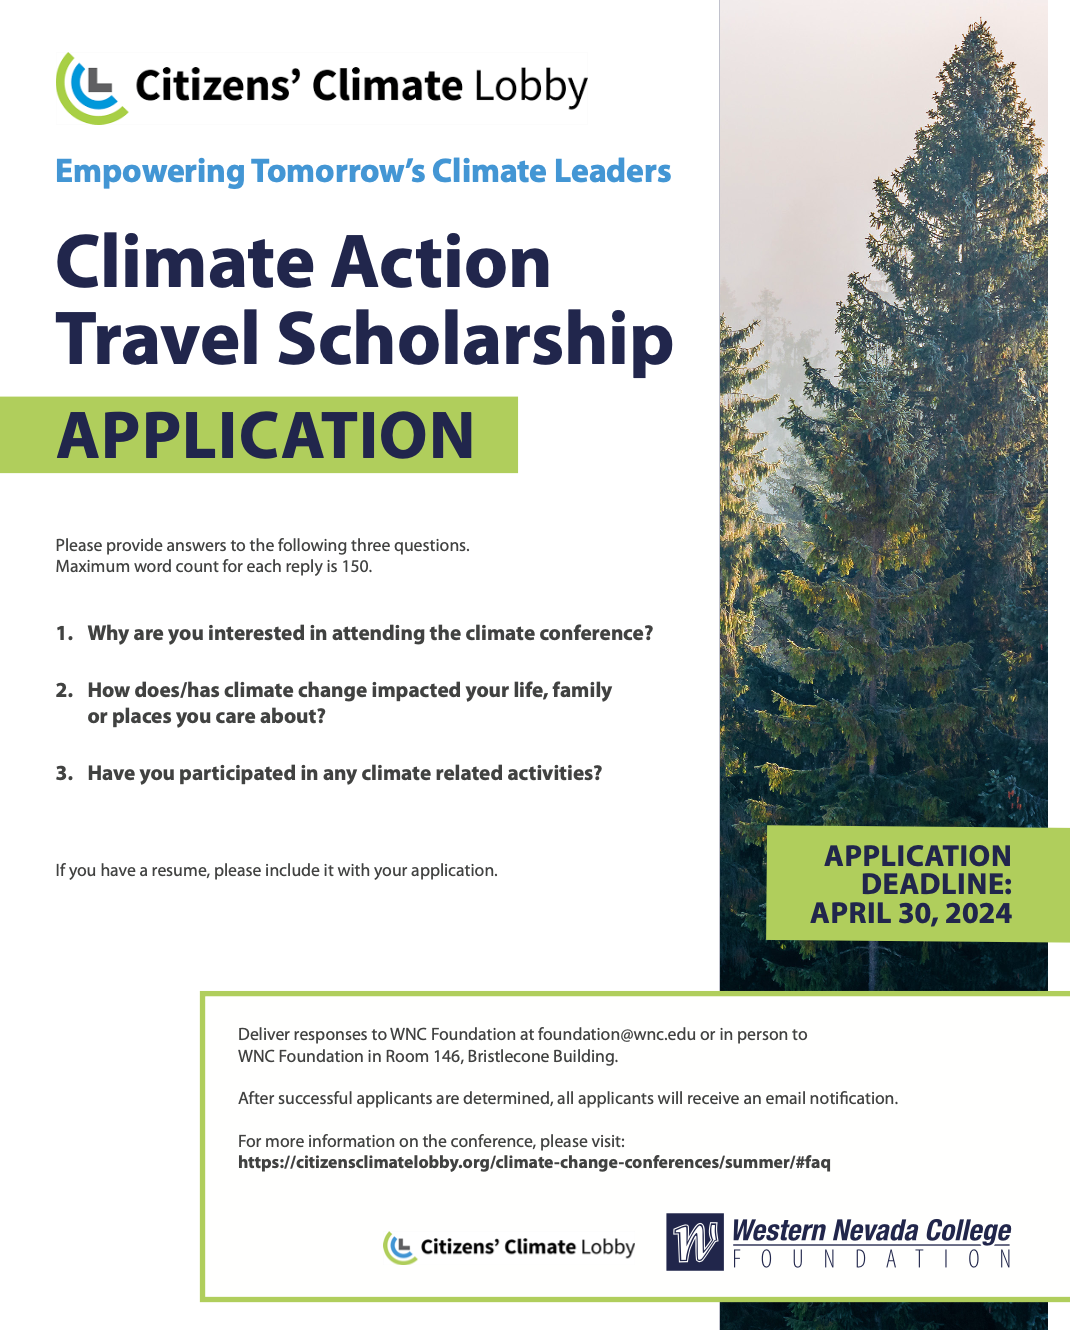 The deadline for students to apply for a scholarship to cover costs of attending a climate conference in Washington, D.C., is April 30.